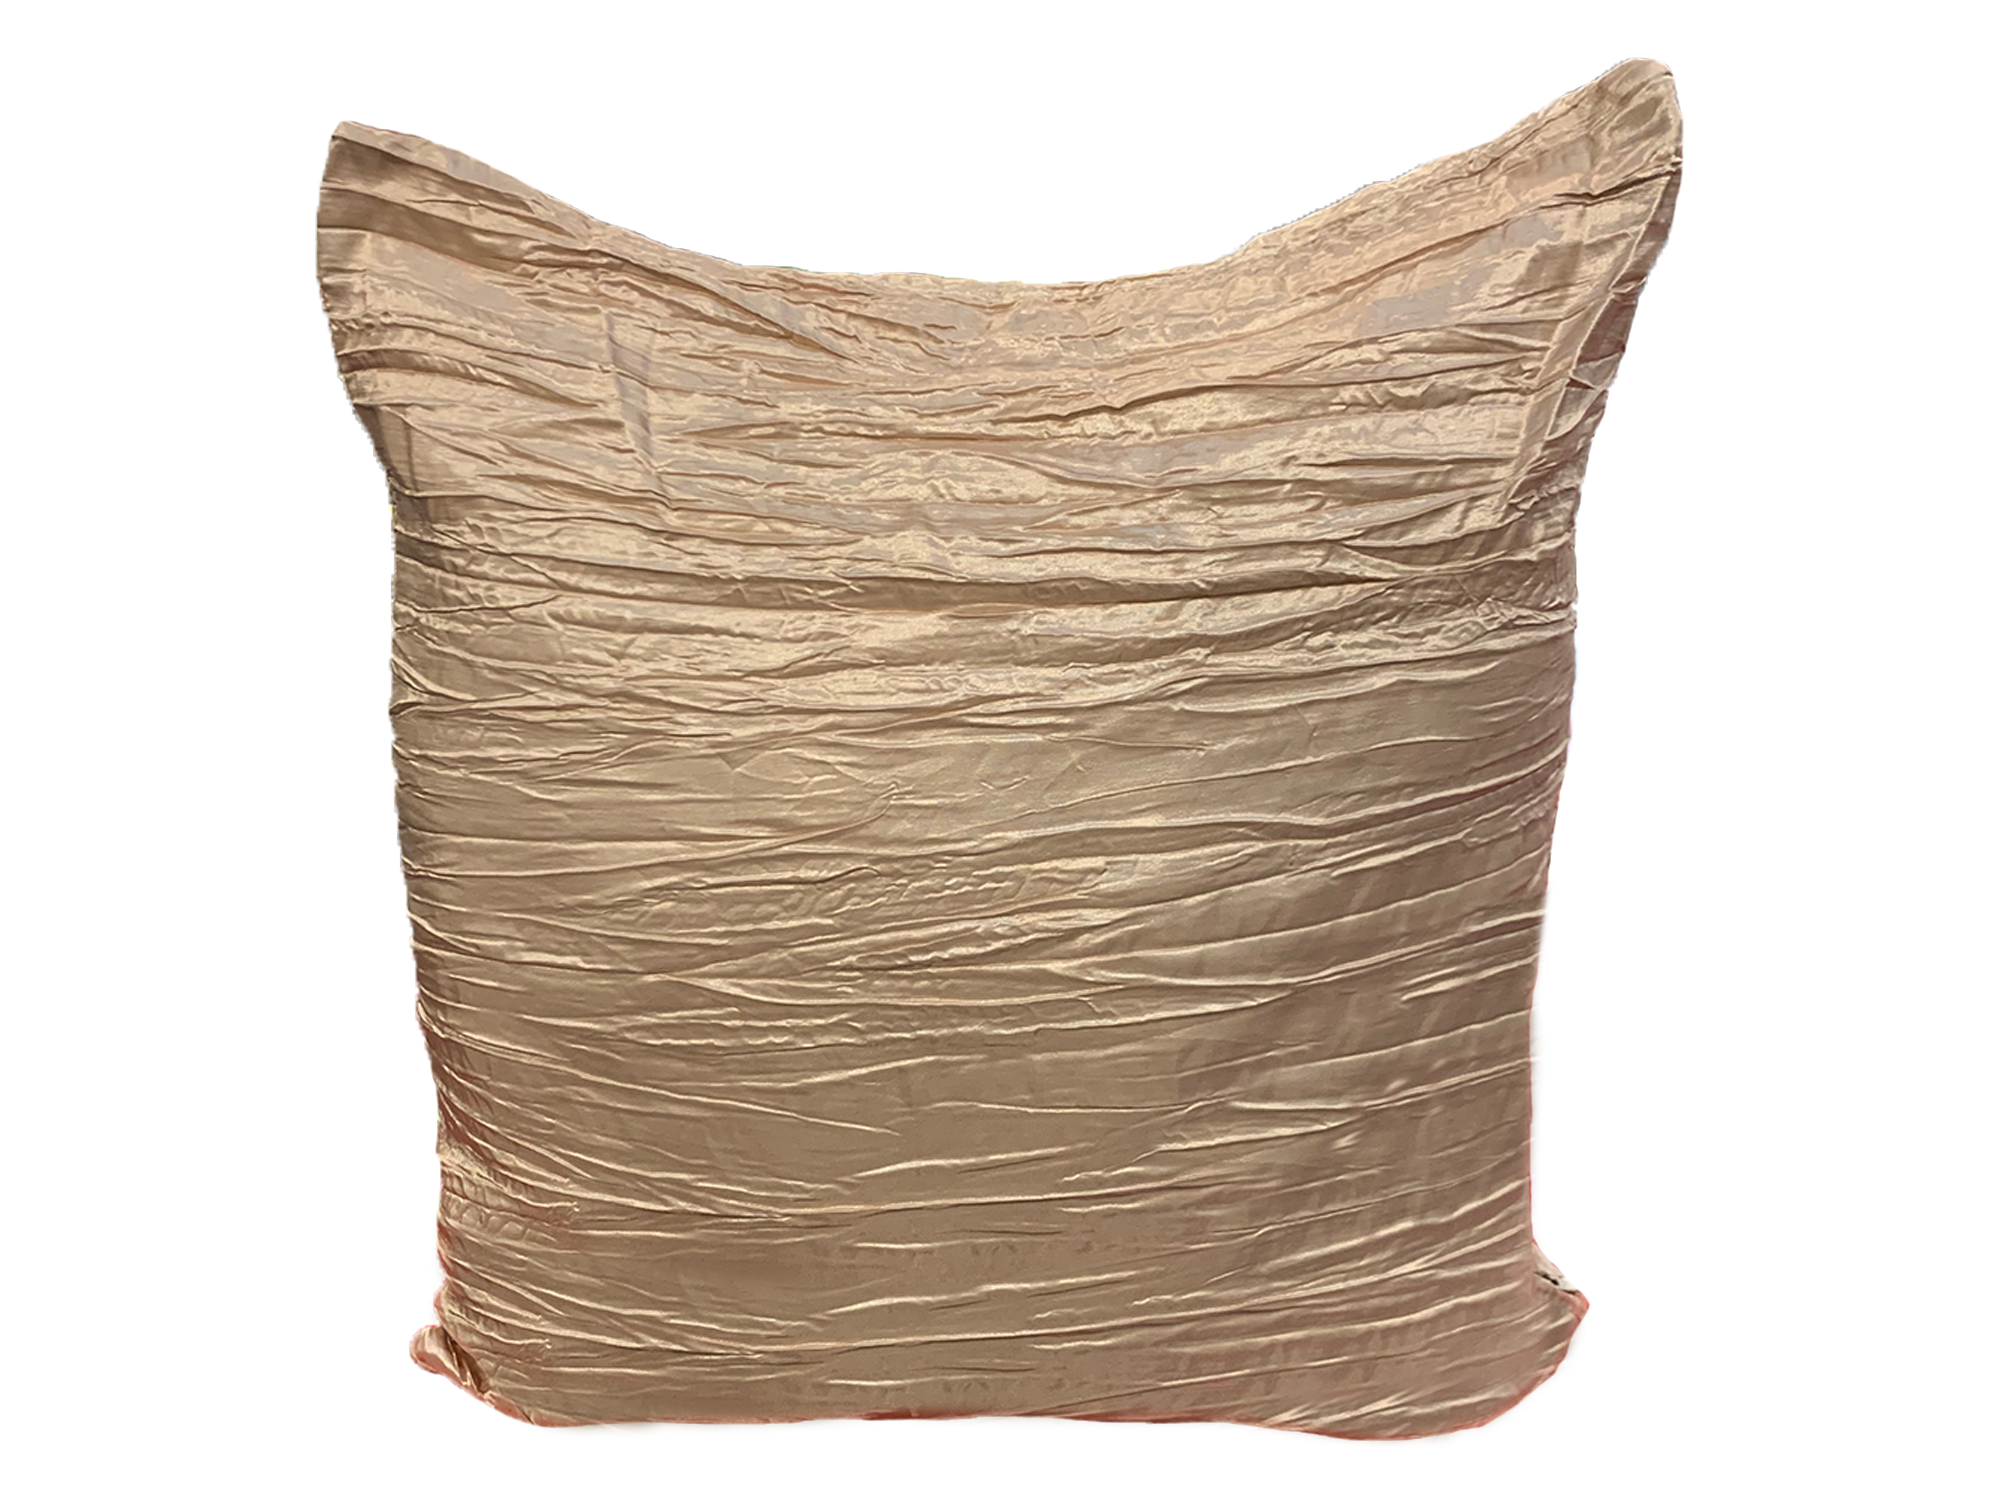 CRINKLE PILLOW - TAUPE/GOLD